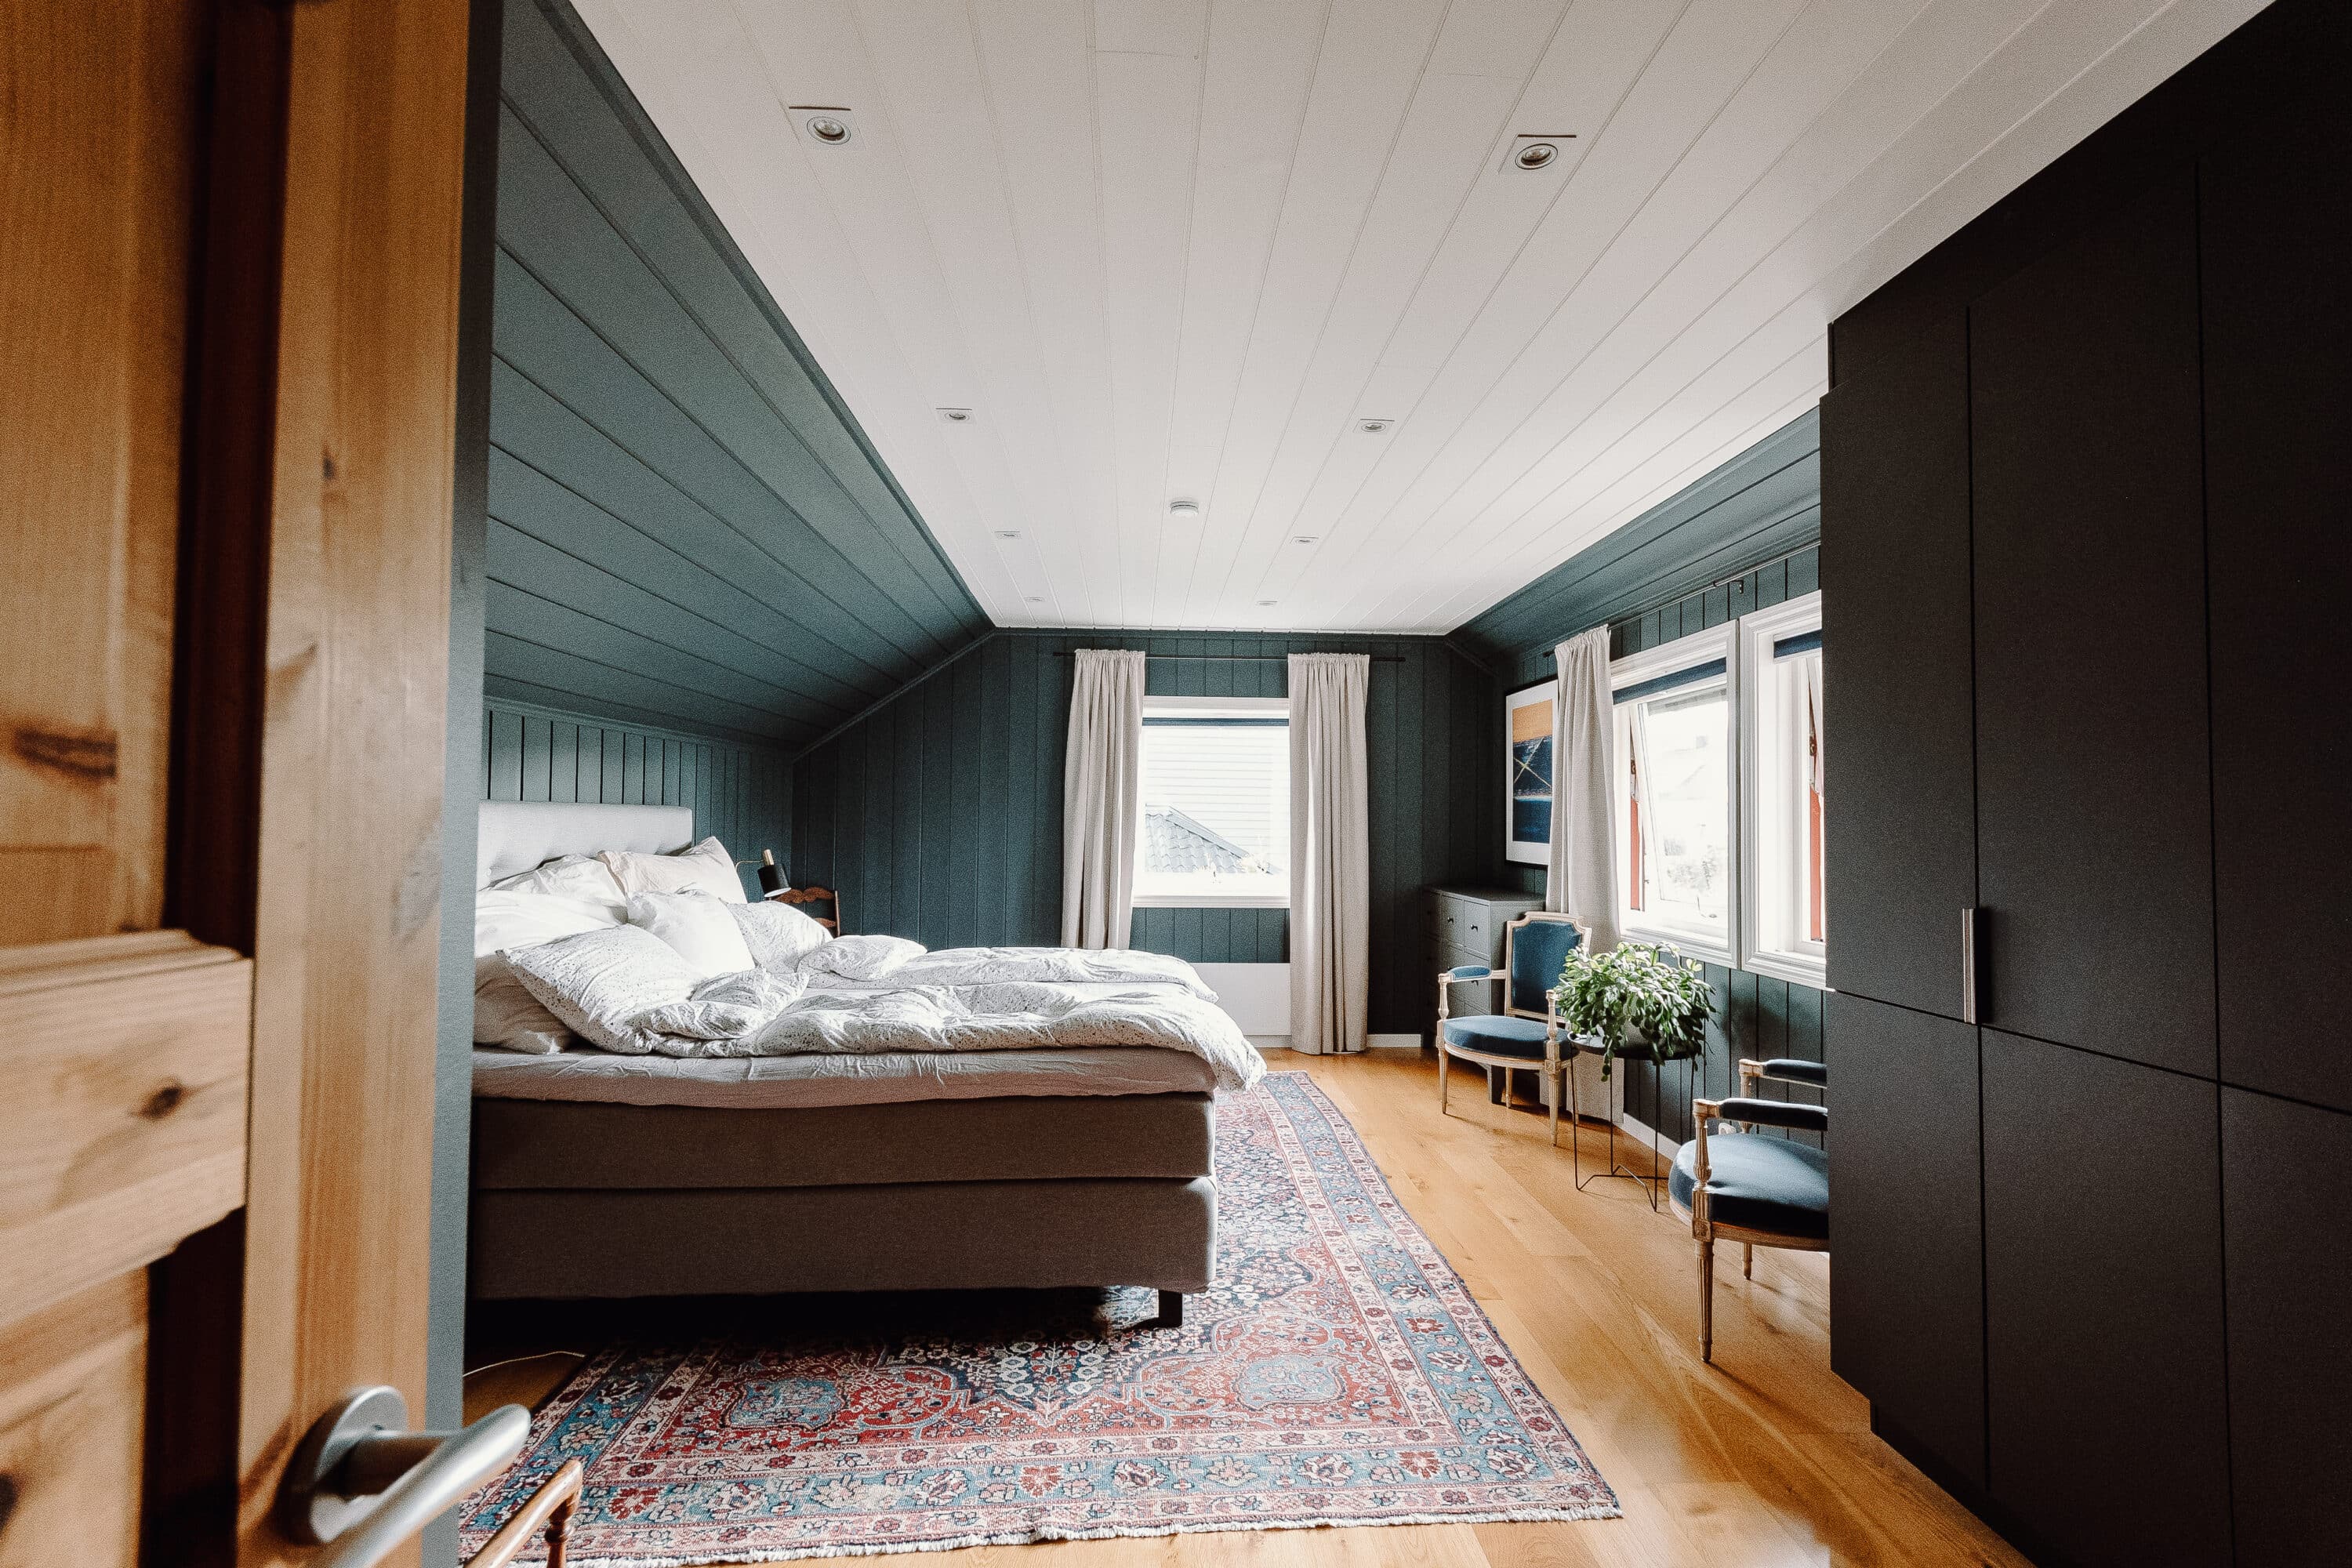 Come tour this dreamy main bedroom space